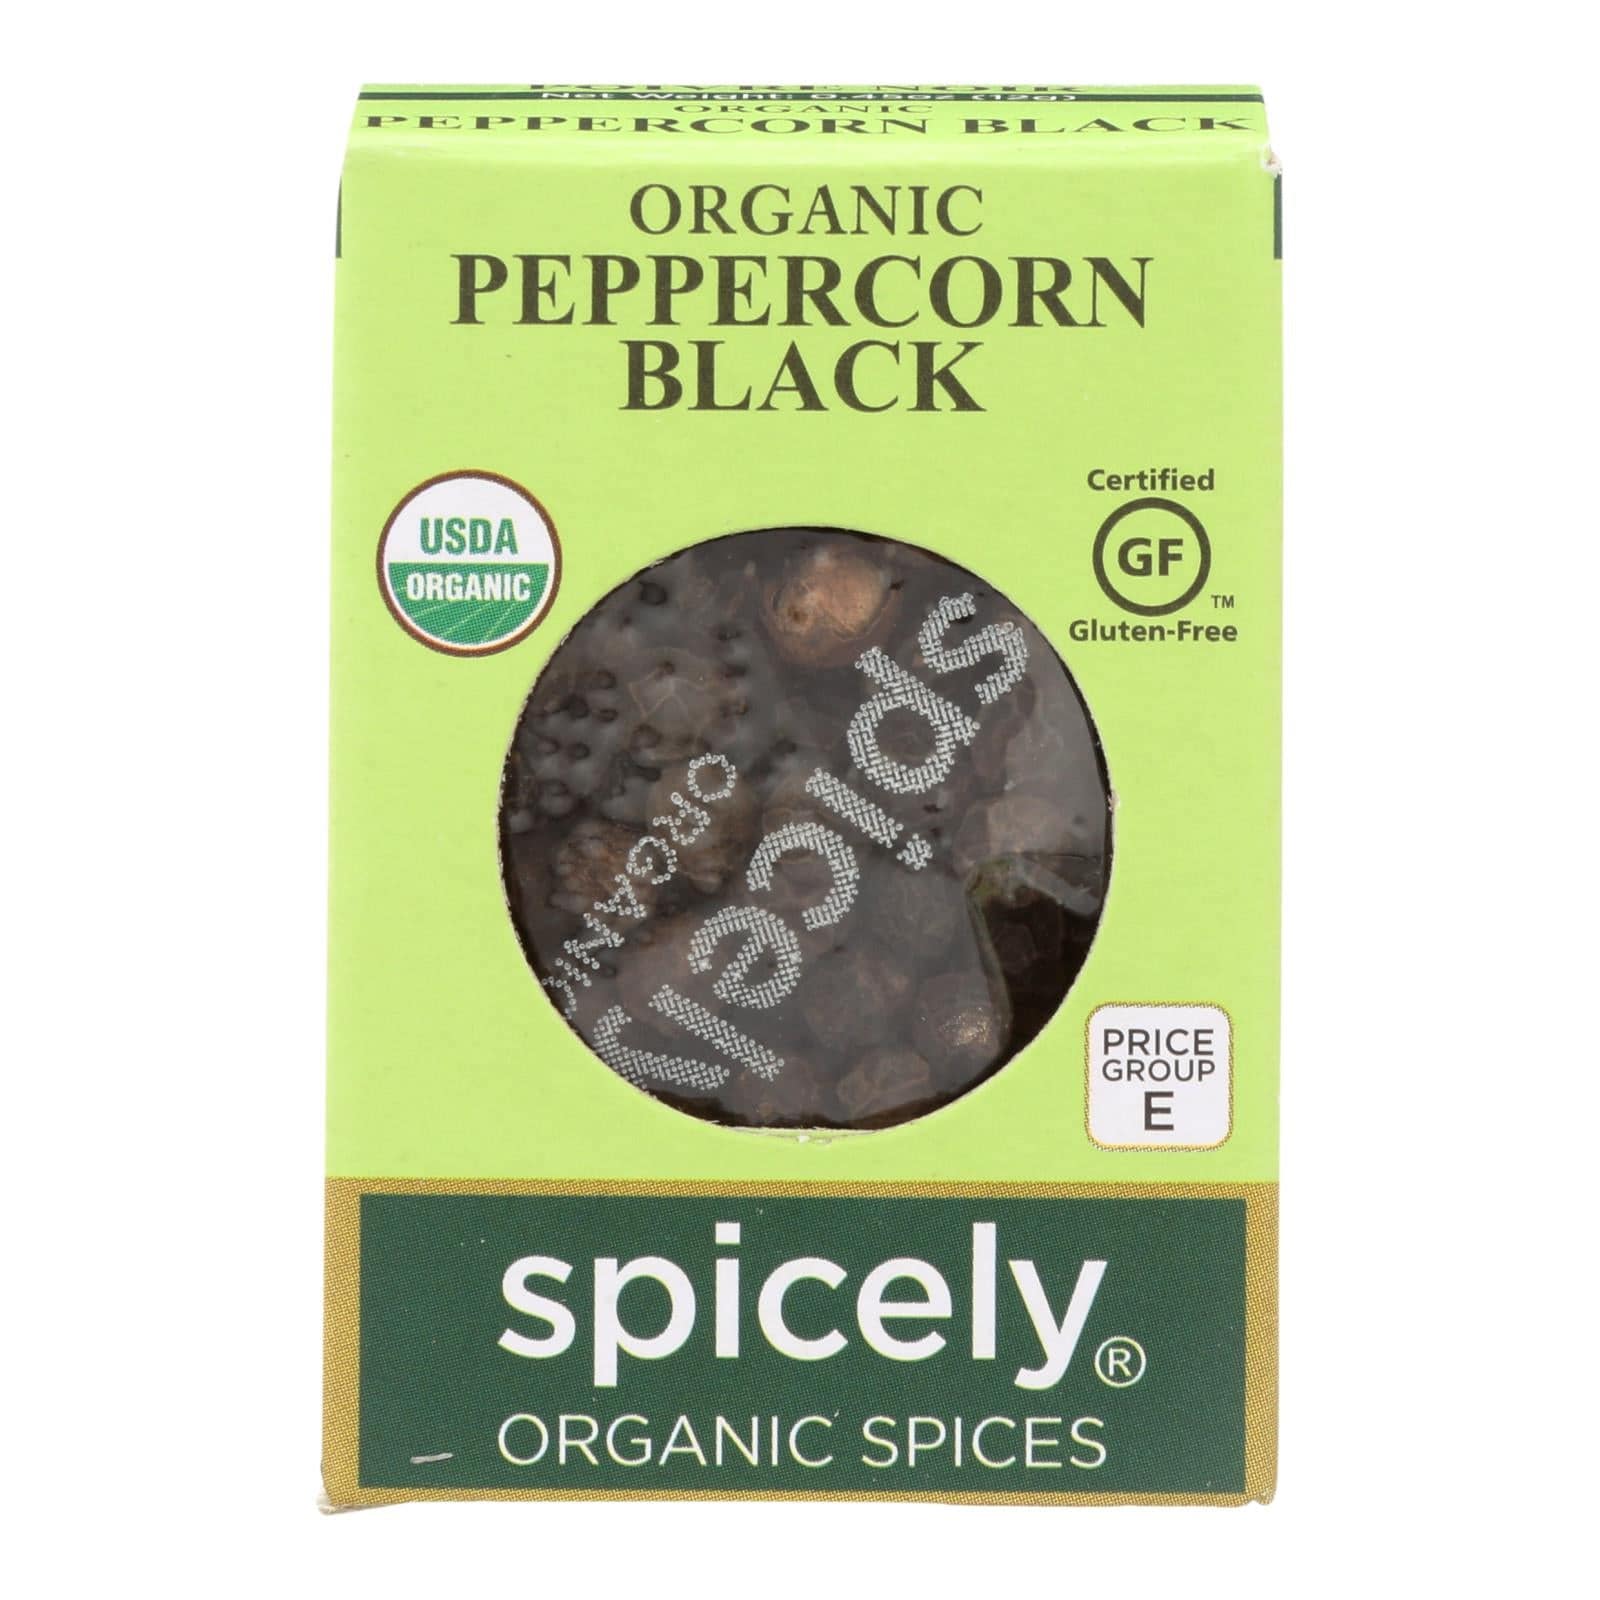 Buy Spicely Organics - Organic Peppercorn - Black - Case Of 6 - 0.45 Oz.  at OnlyNaturals.us